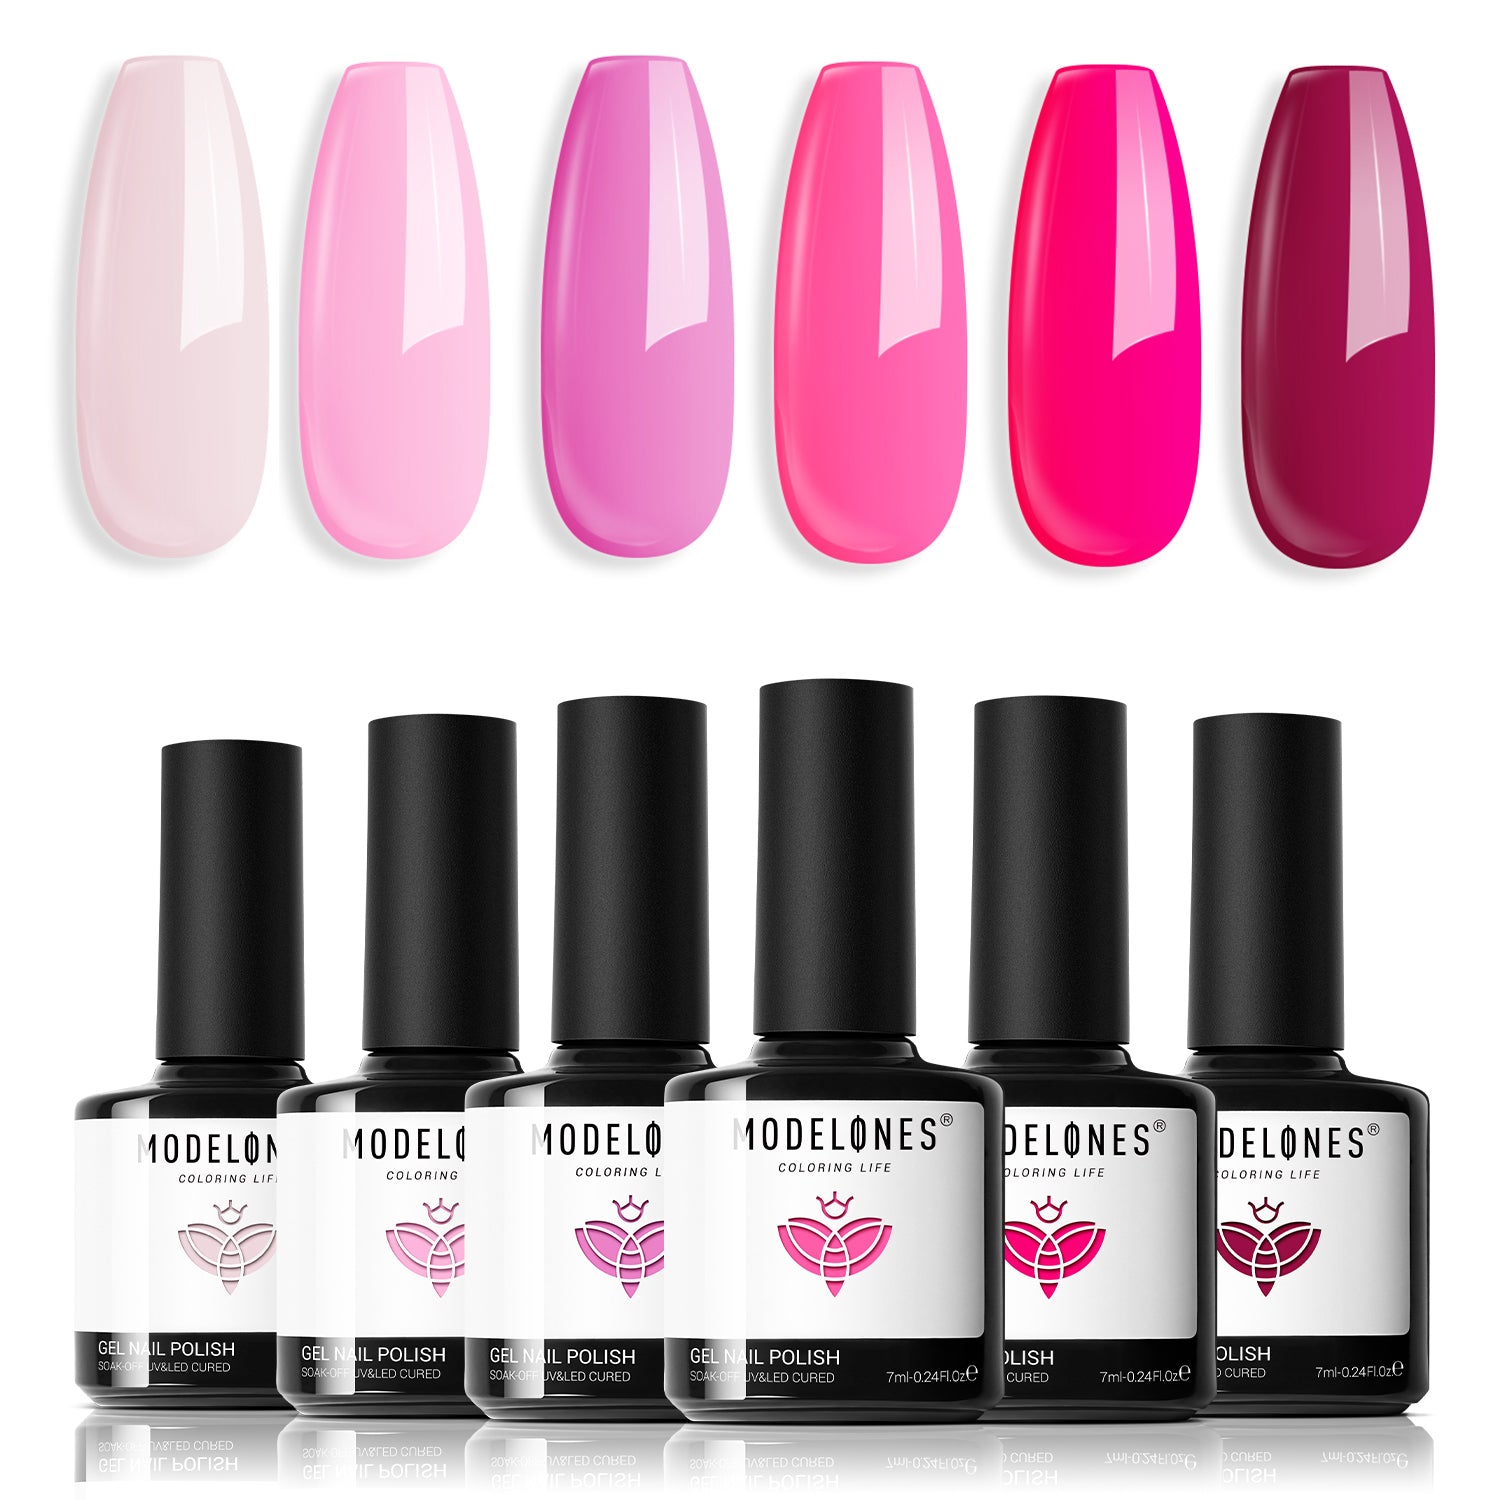 You Look Perfect Tonight - 6 Colors Gel Nail Polish Set【US ONLY】